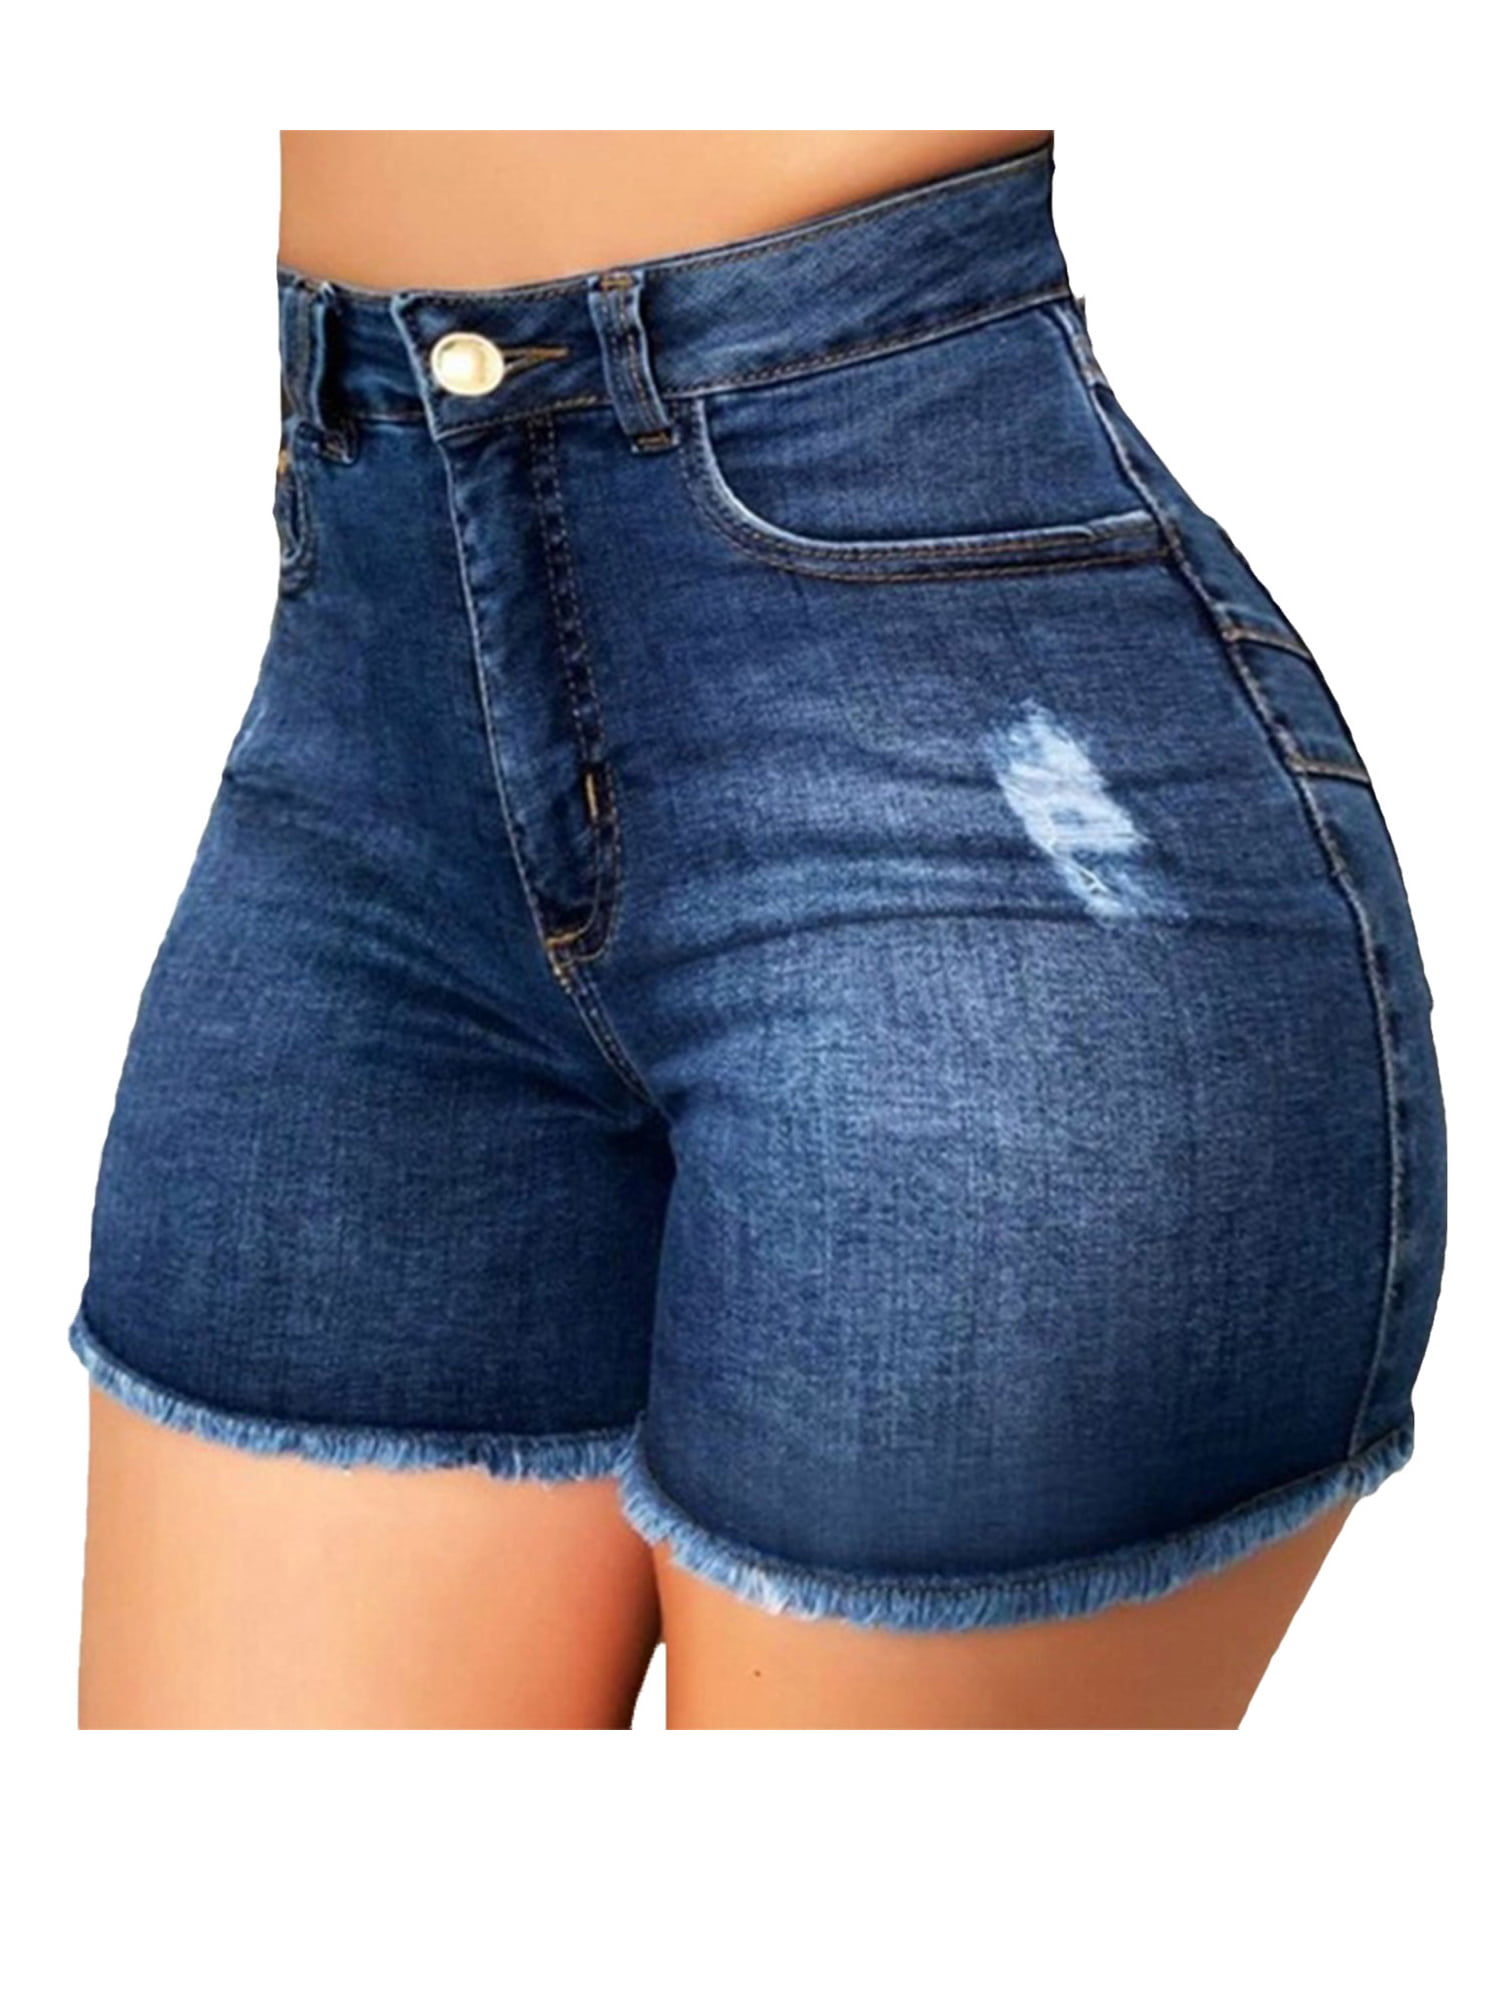 WOMEN FASHION Jeans Shorts jeans Ripped discount 78% Blue/Multicolored Bershka shorts jeans 